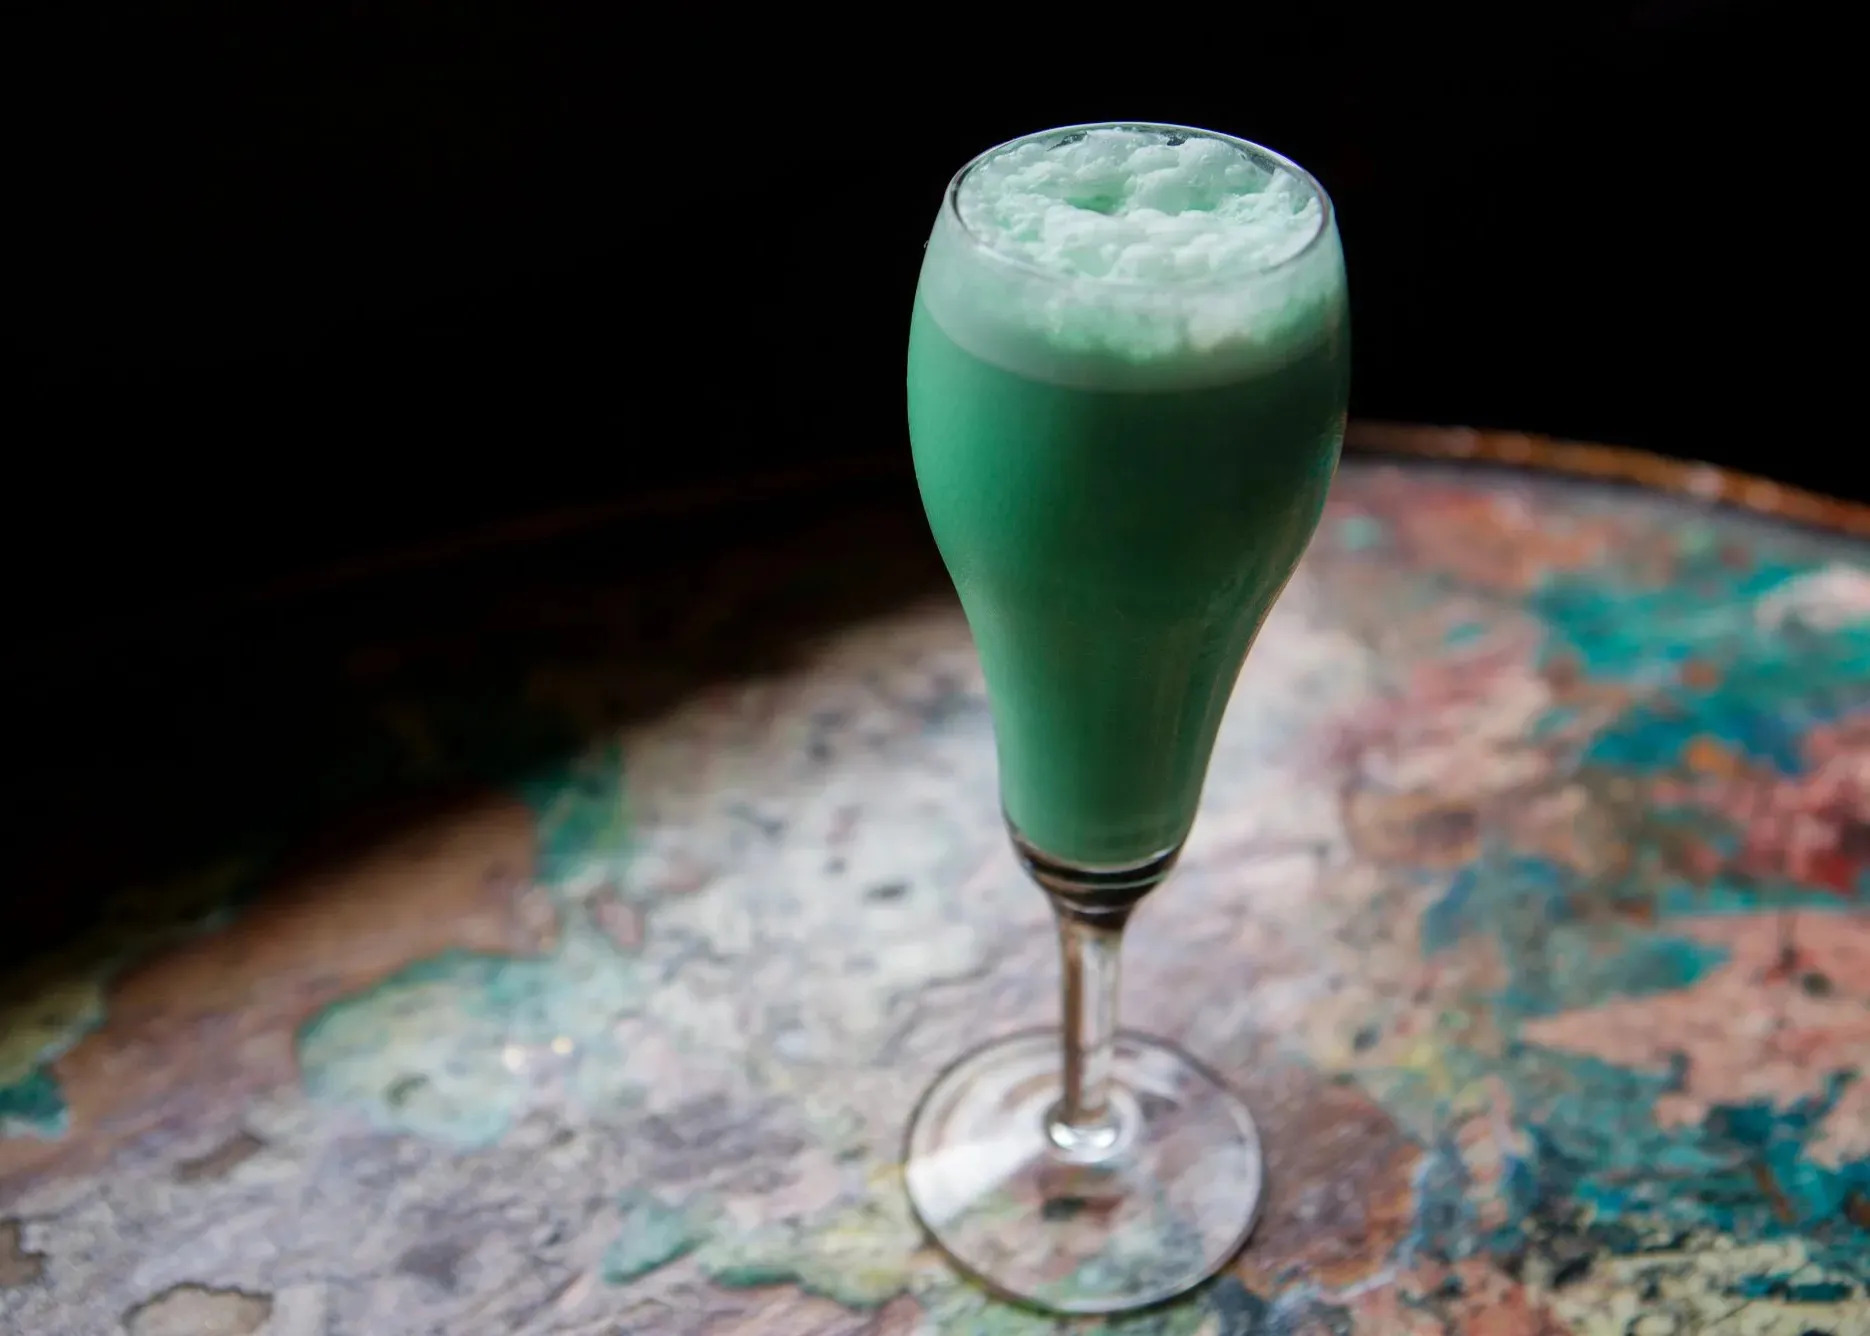 A bright green, frothy drink in a champagne-like flute sits on table.